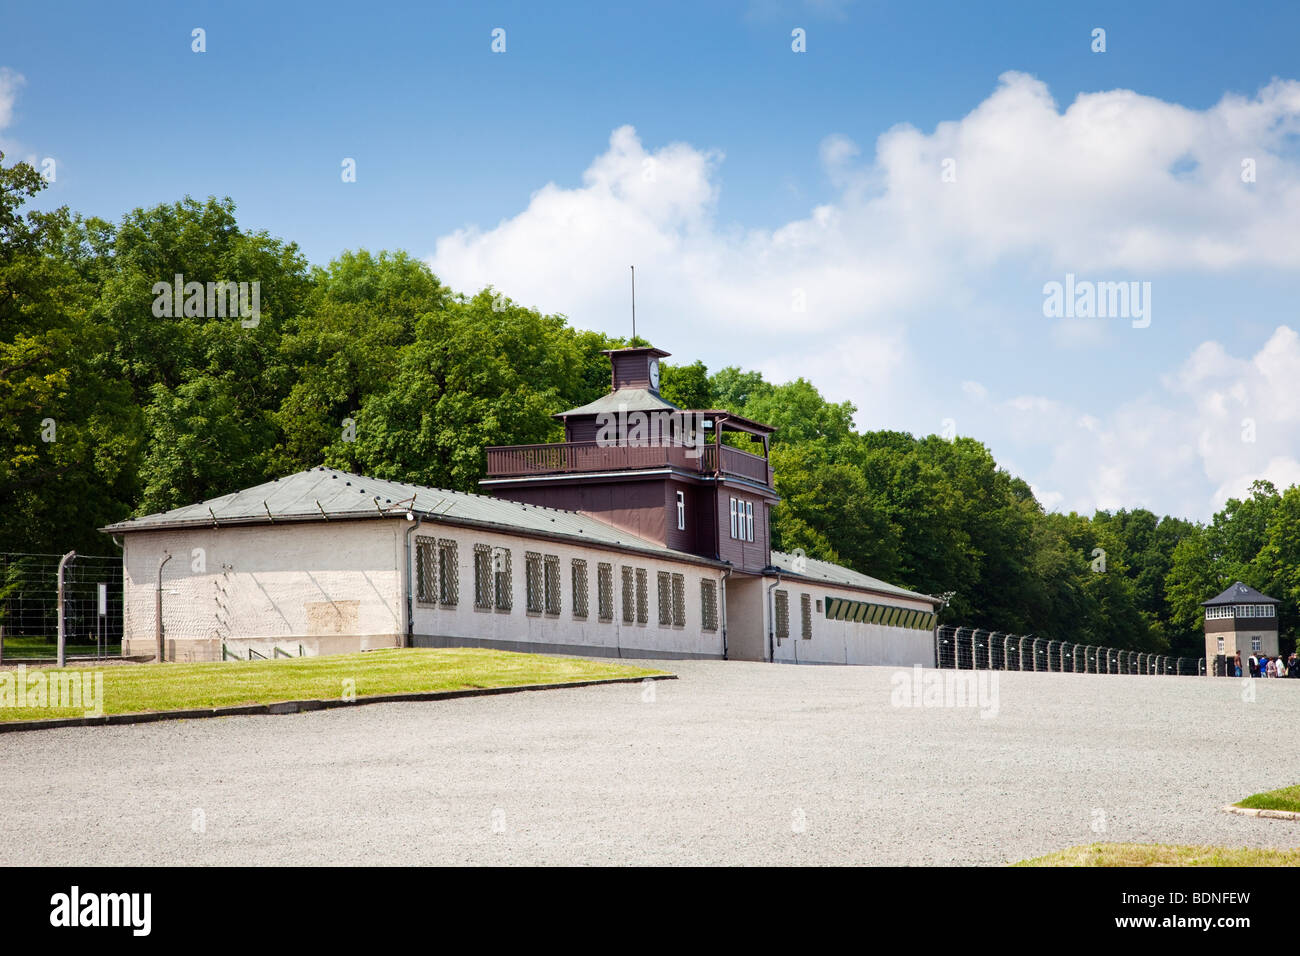 Entrance building at Buchenwald Nazi Concentration Camp, Ettersberg, Germany, Europe Stock Photo